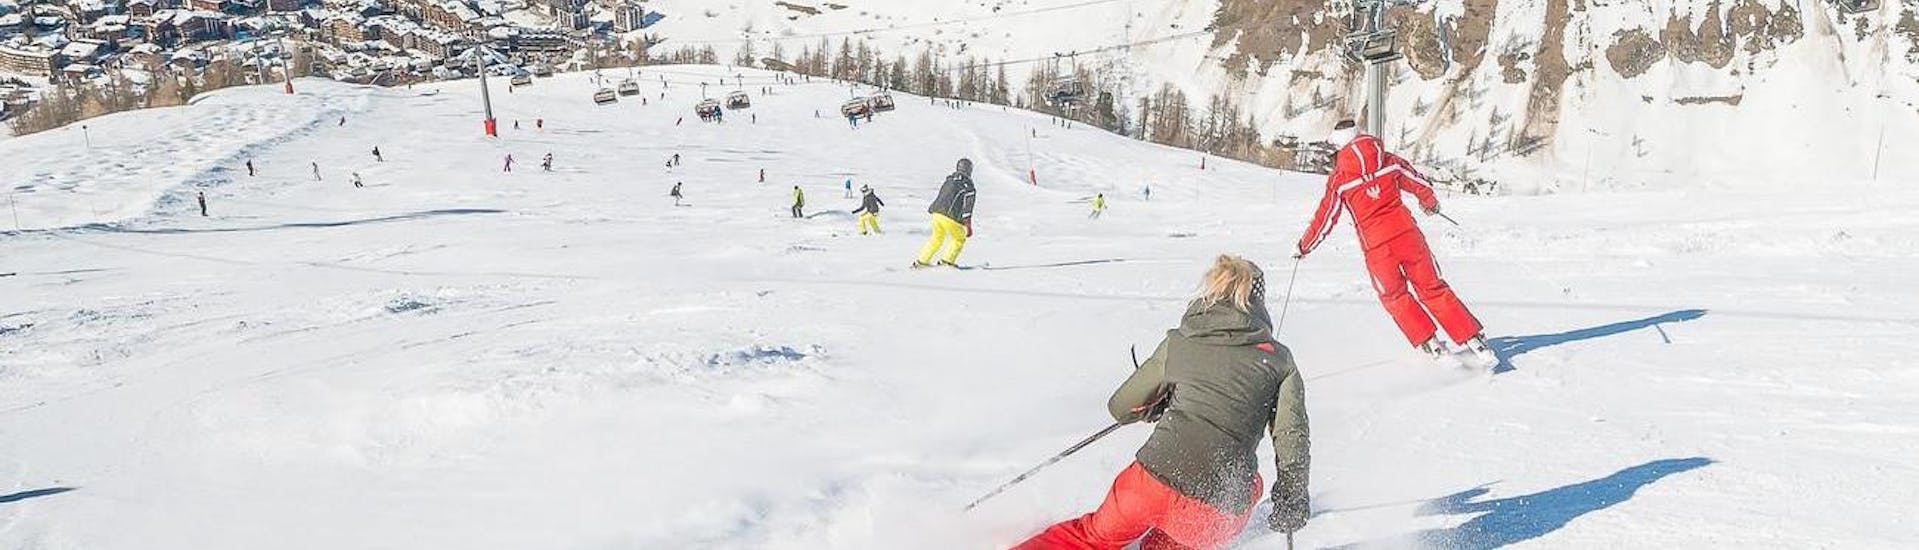 Adult skiers are learning how to ski while keeping the right ski stance in the Ski Lessons for Adults - All Levels organised by the school ESF Val d'Isère.